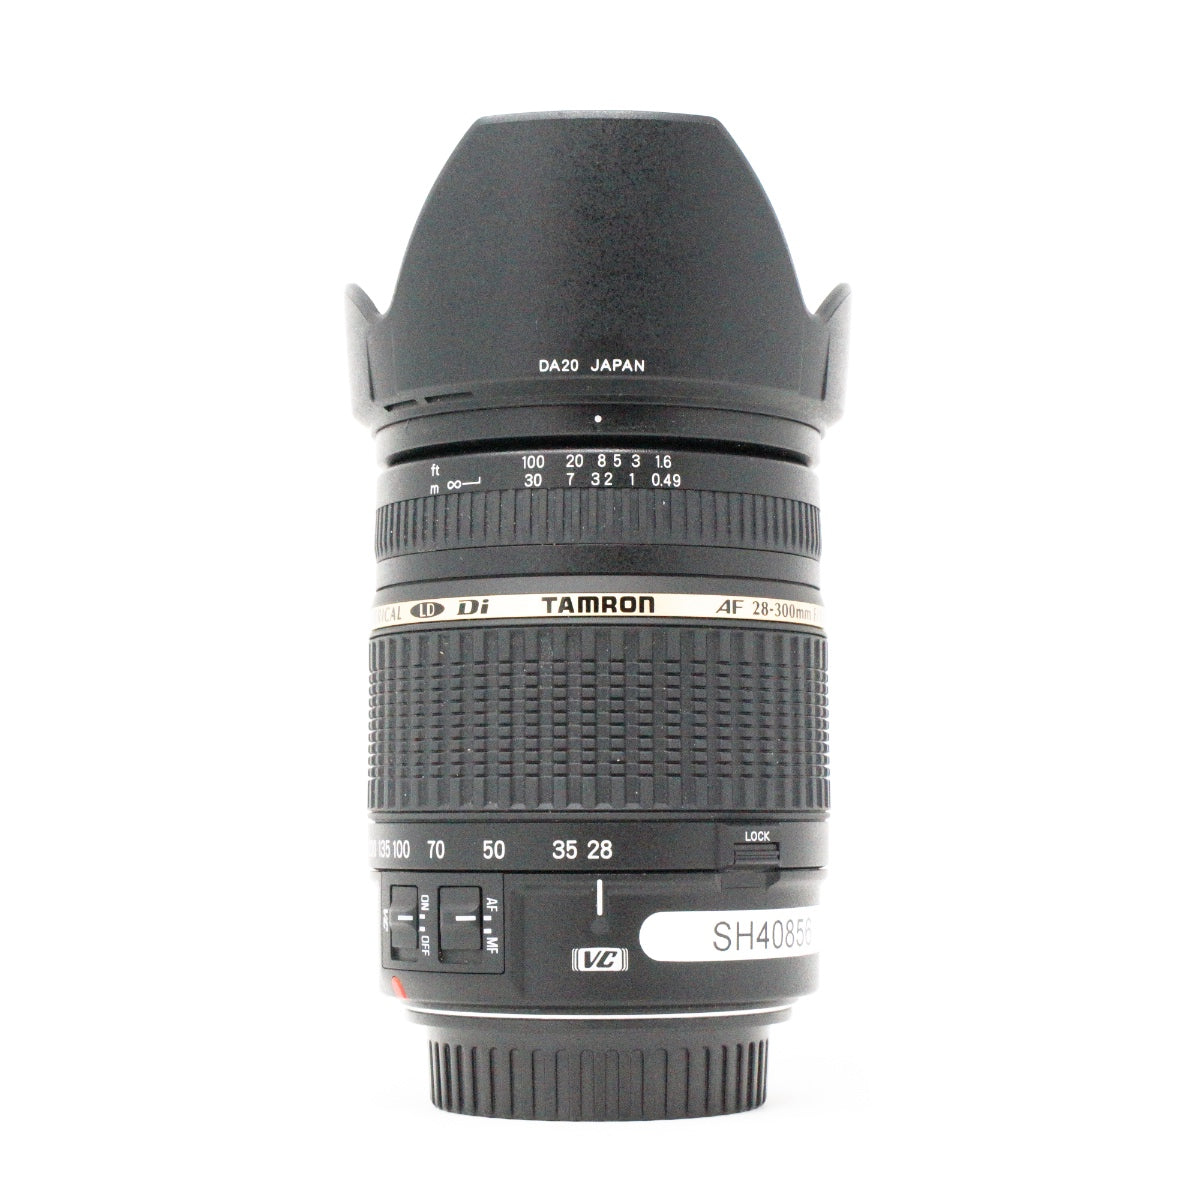 Used Tamron 28-300mm f/3.5-6.3 IF Macro Lens for Canon